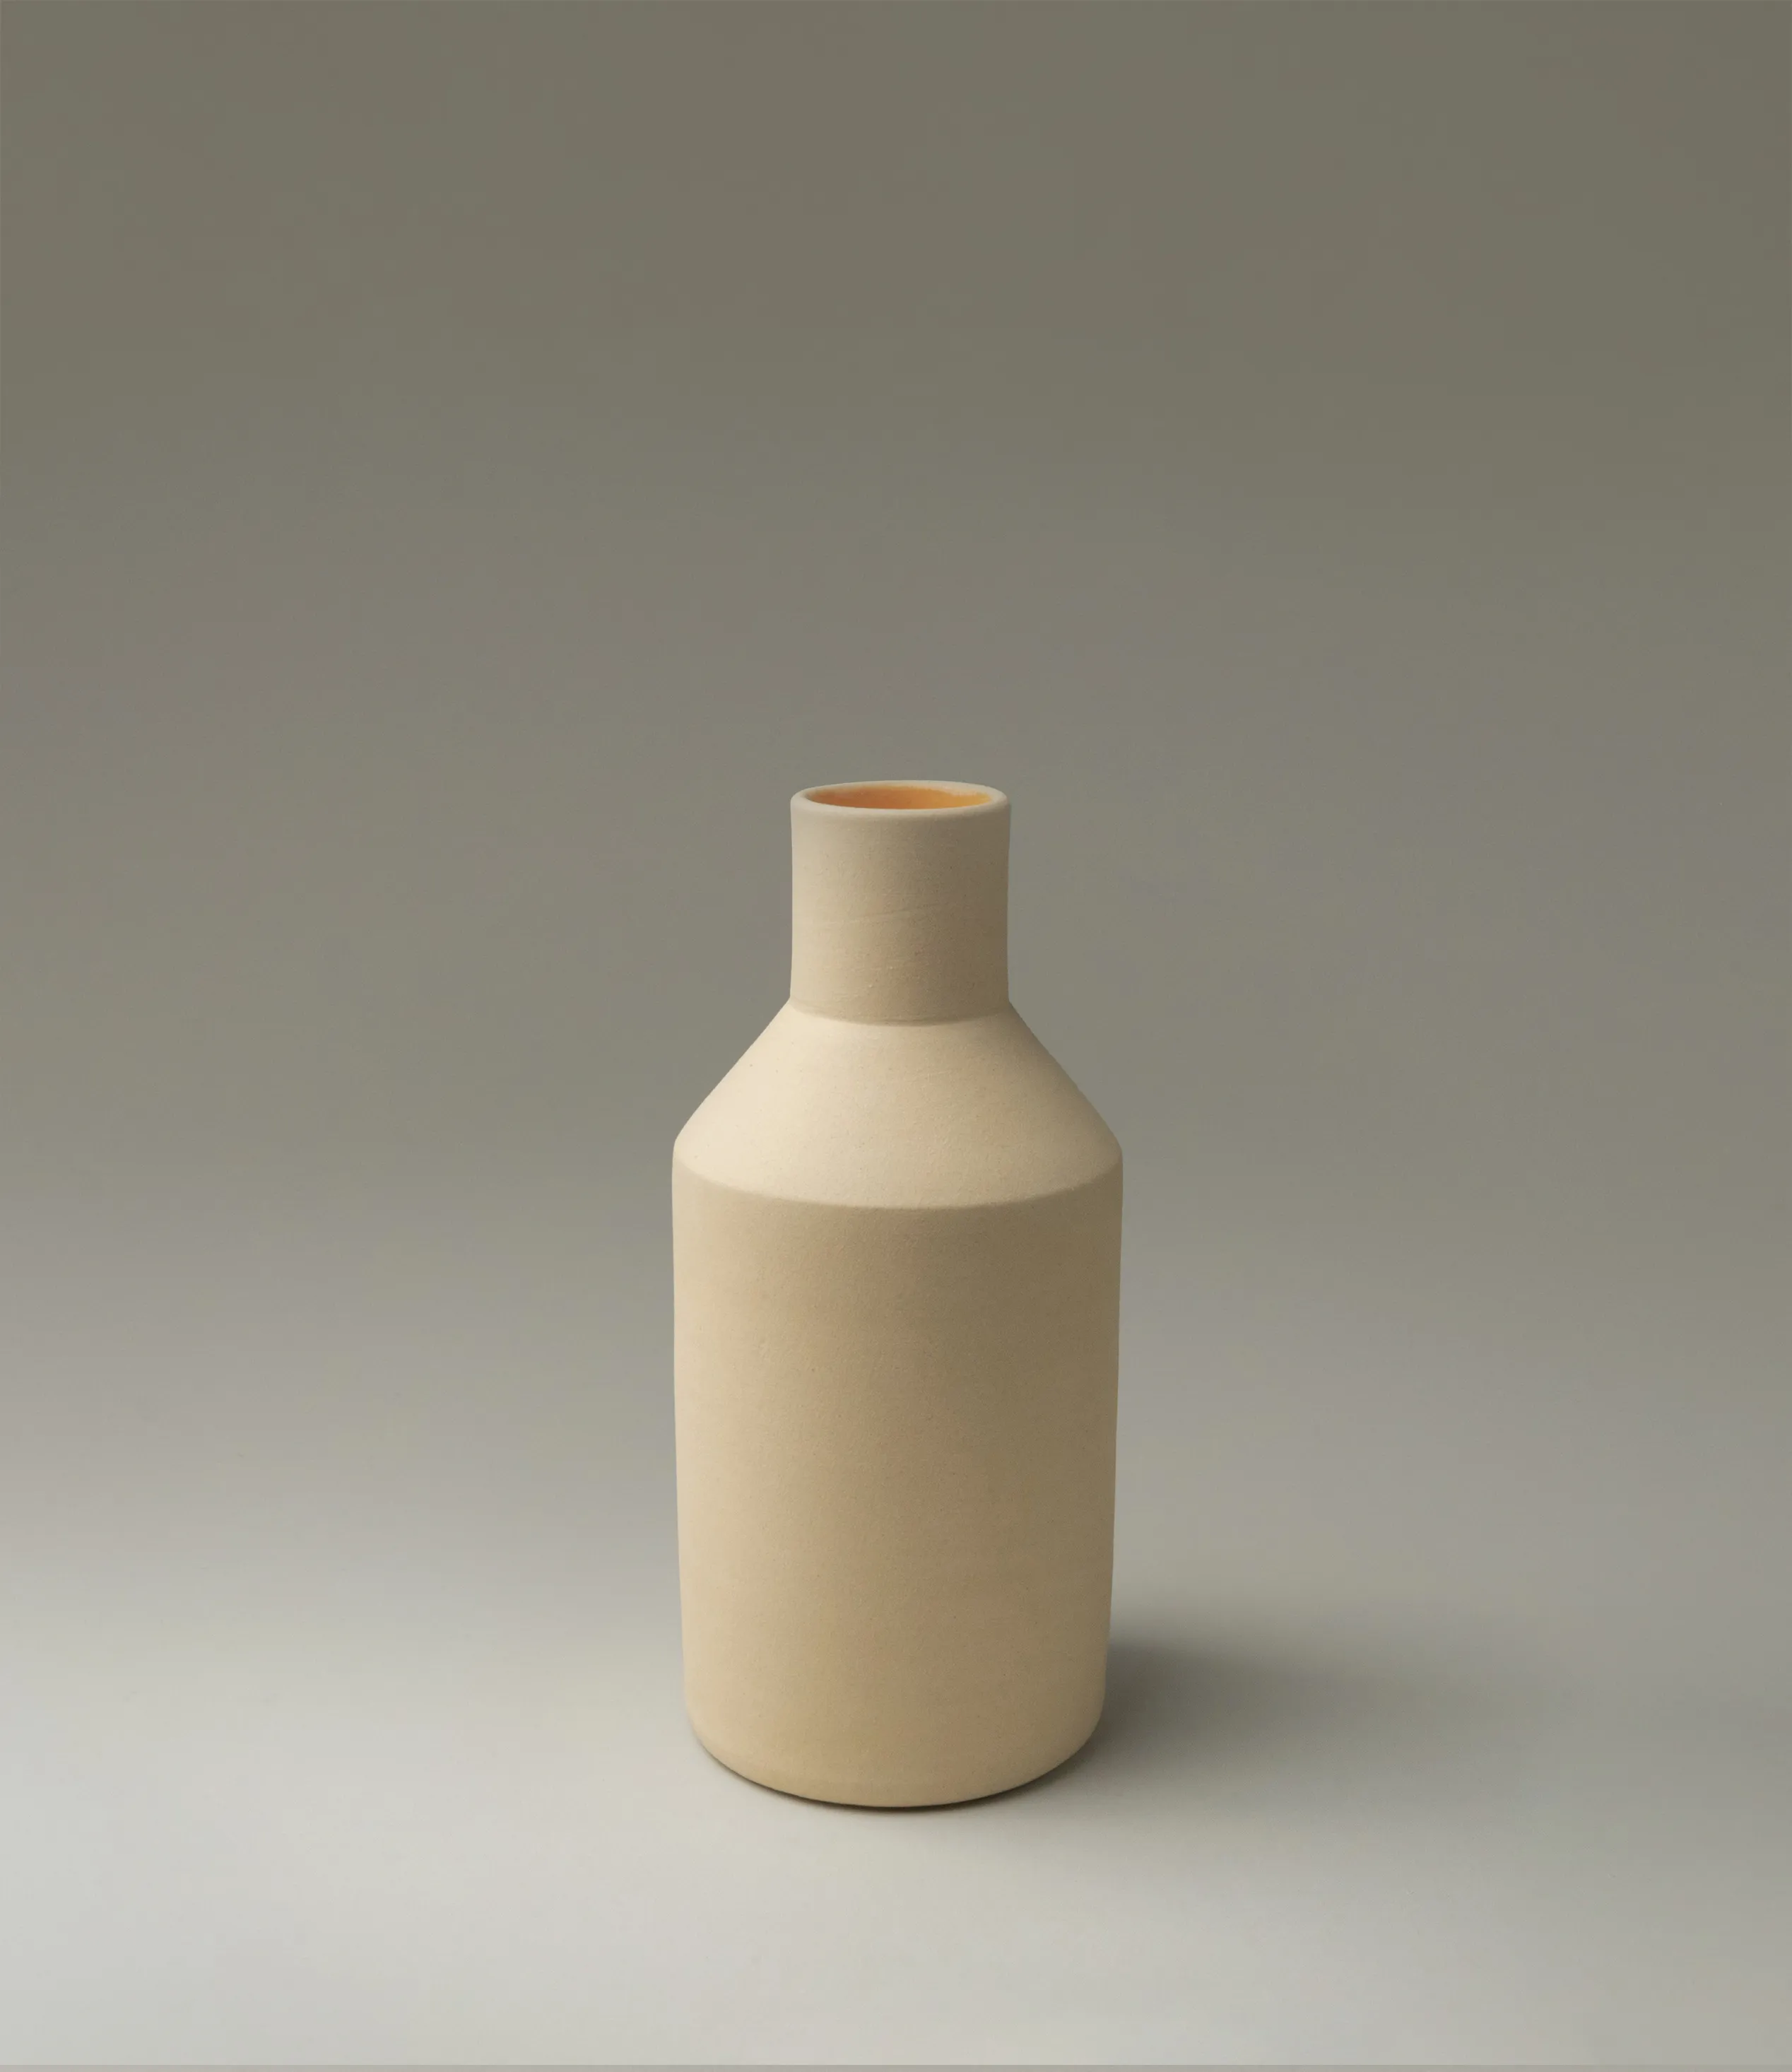 Natural Orange Vase was designed by Ocactuu. The item has a champagne color matte finish on the outside and a bright orange glossy glaze on the inside. The product is very geometrical and it has clear edges.